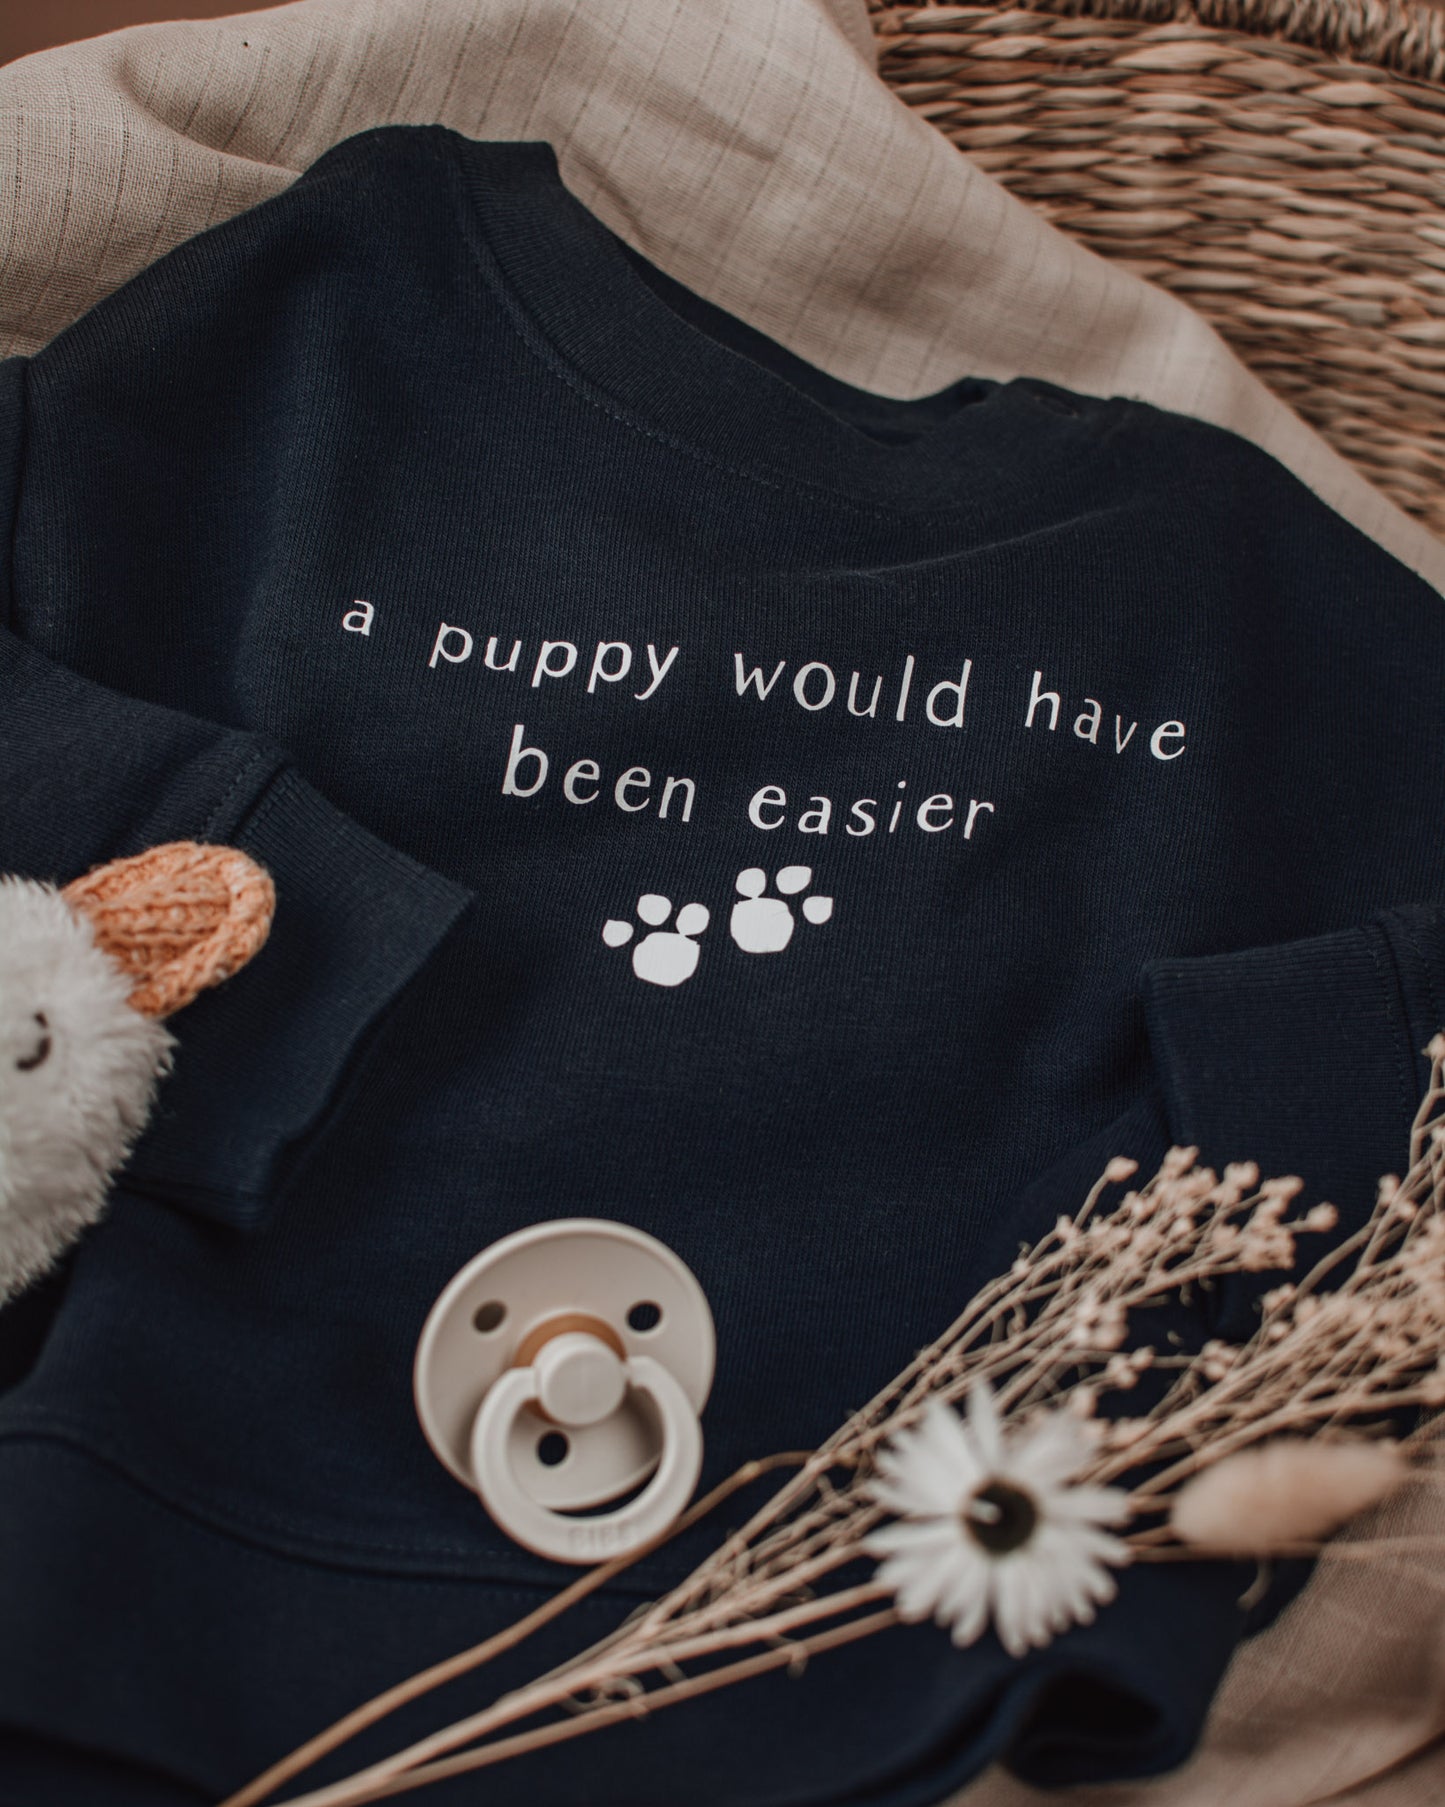 A Puppy Would Have Been Easier - Baby Sweatshirt